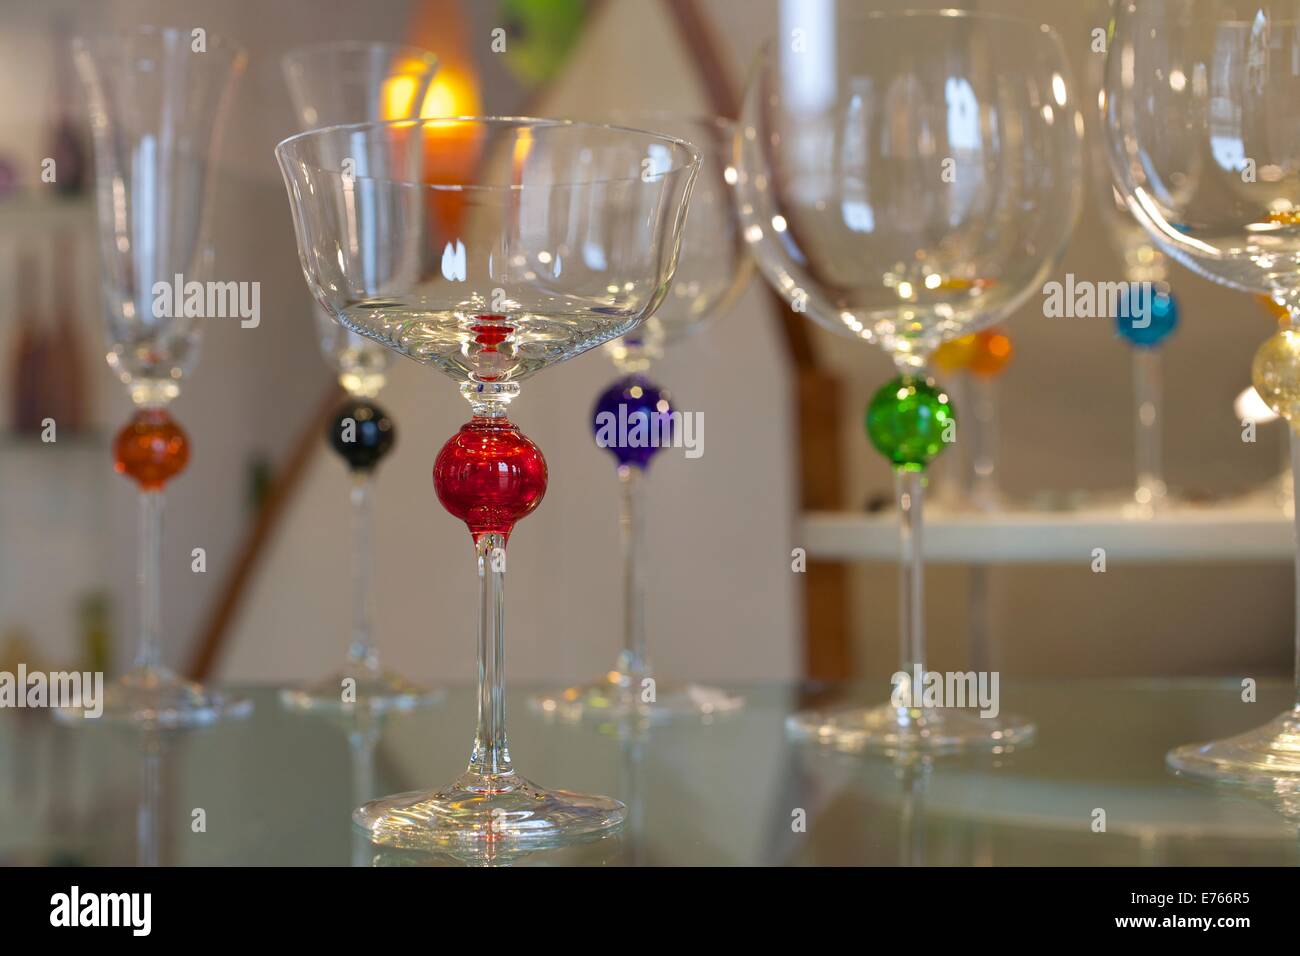 Murano glass for sale in shop window, St Mark's Square, Venice, Italy, Europe Stock Photo